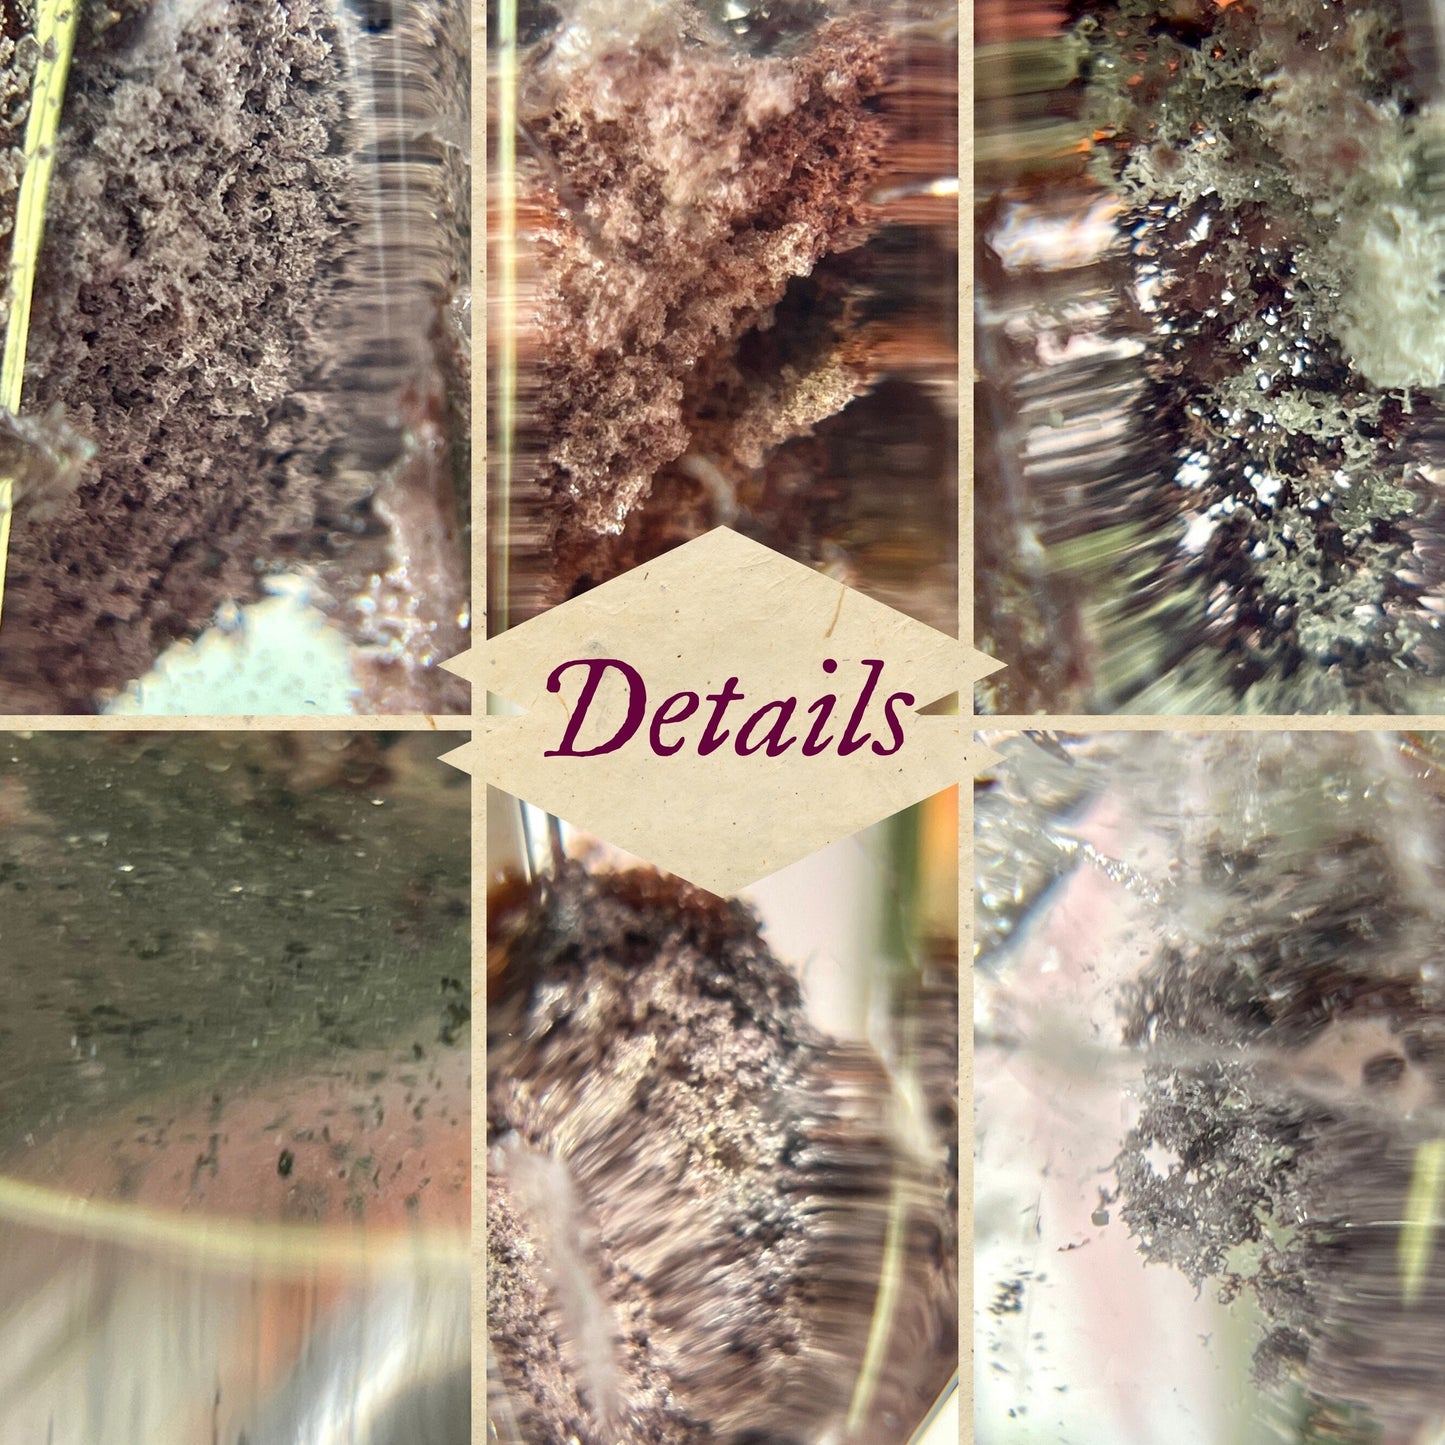 up close macro photos, zoomed in. Showing details of lodolite Garden Quartz crystal inclusions